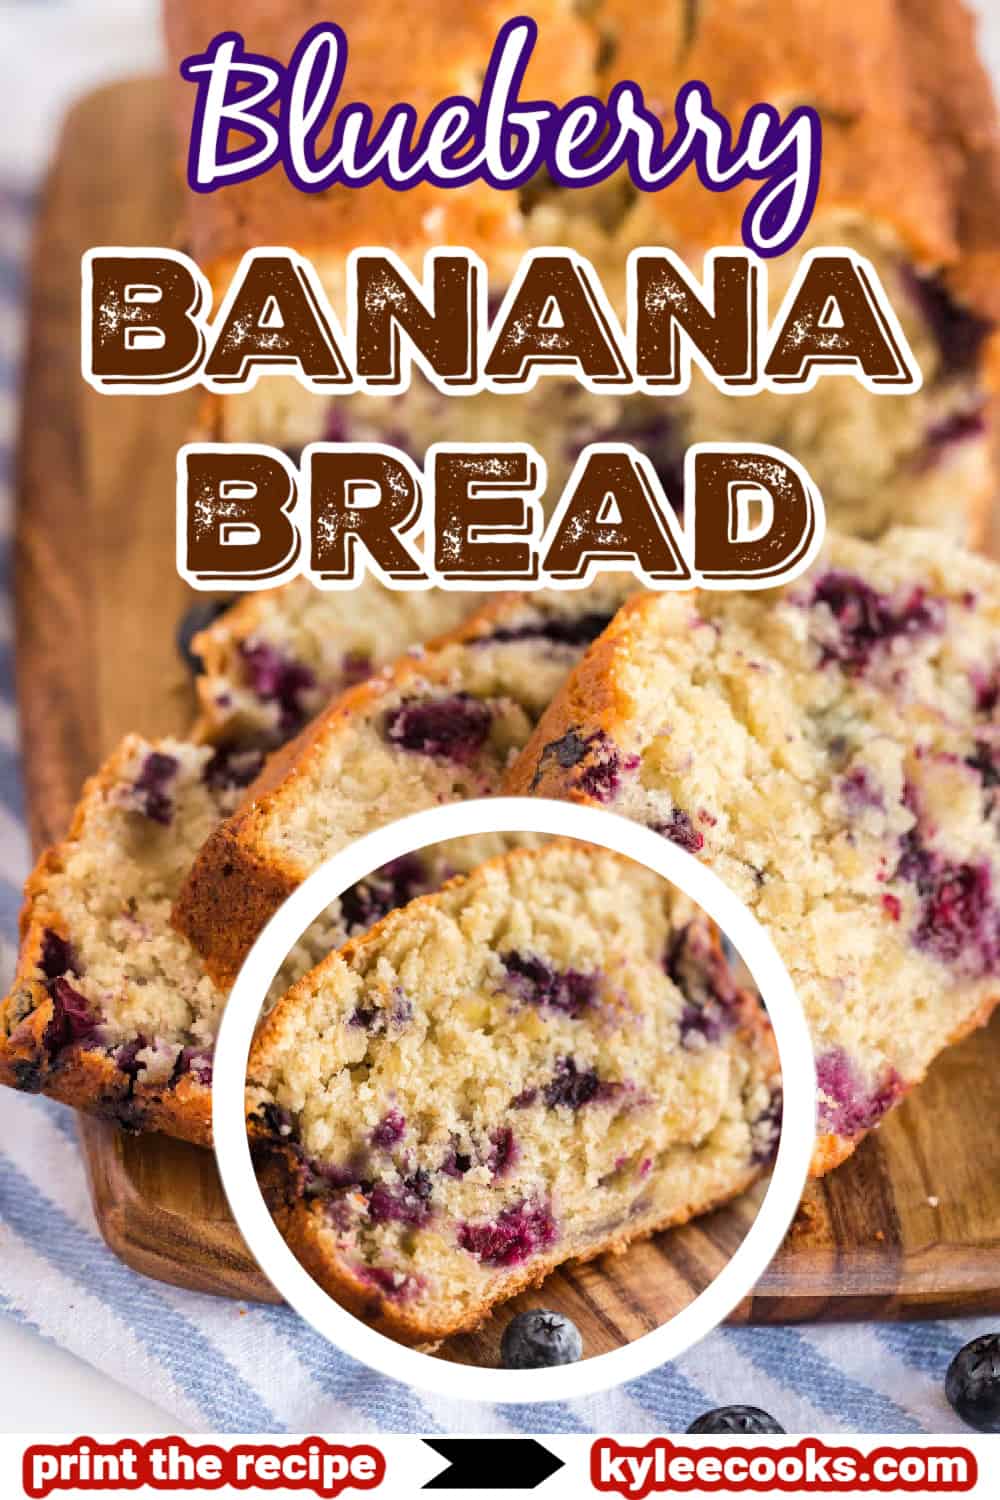 blueberry banana bread with text overlay